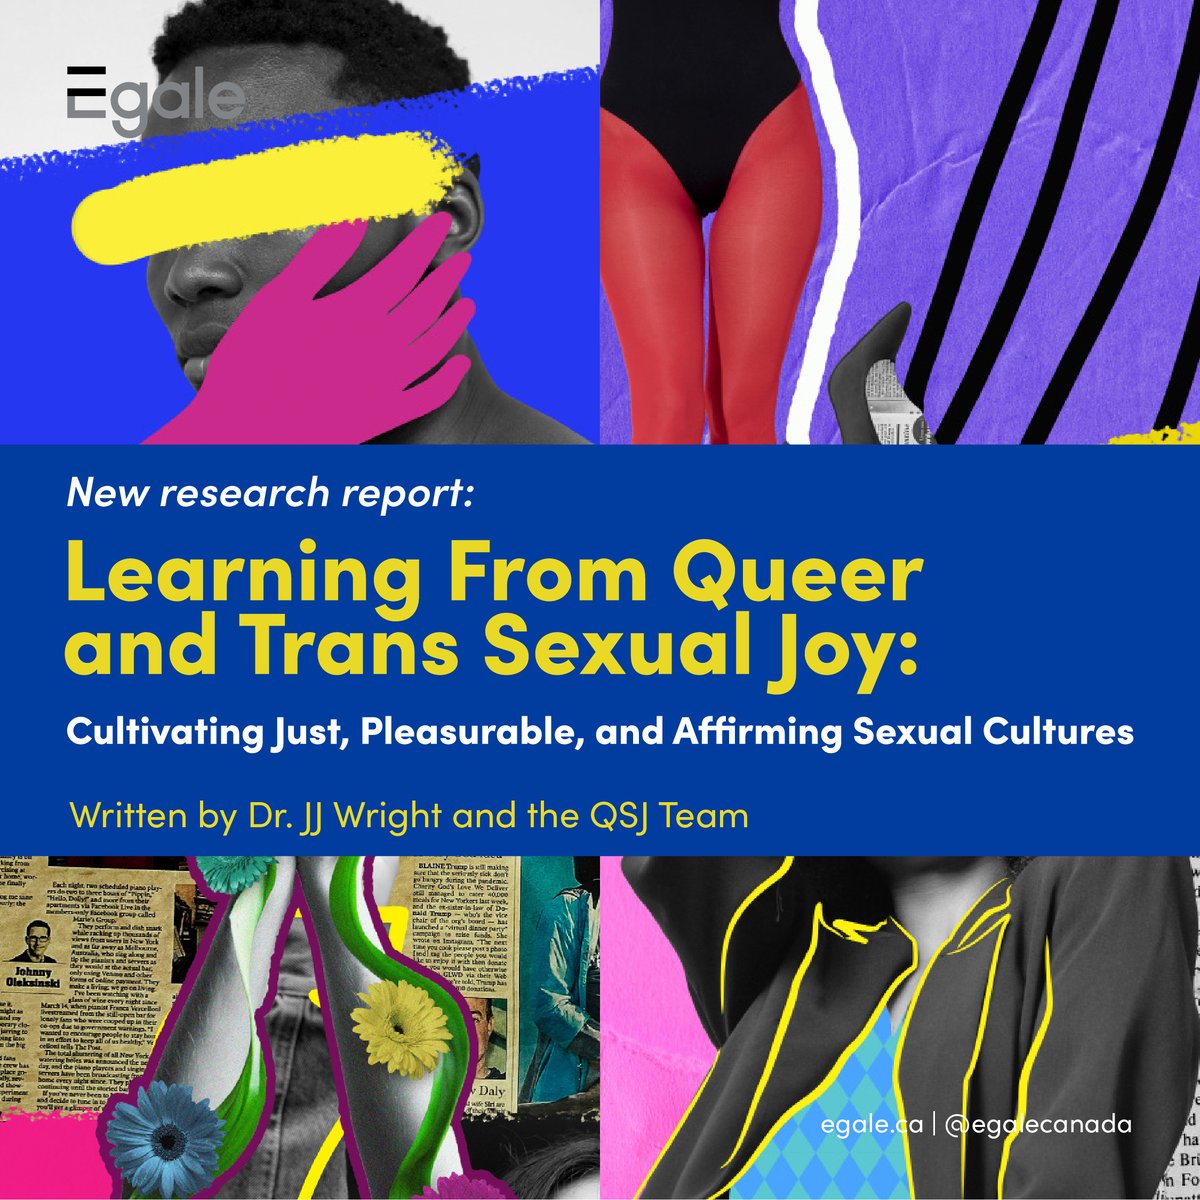 I'm delighted to launch this report from the Queer Sexual Joy project examining how queer and trans sexual joy is interwoven with anti-colonial, counter-hegemonic sexual scripts and offers many lessons for building less violent, more caring sexual cultures. Pls RT! Link⬇ #16Days